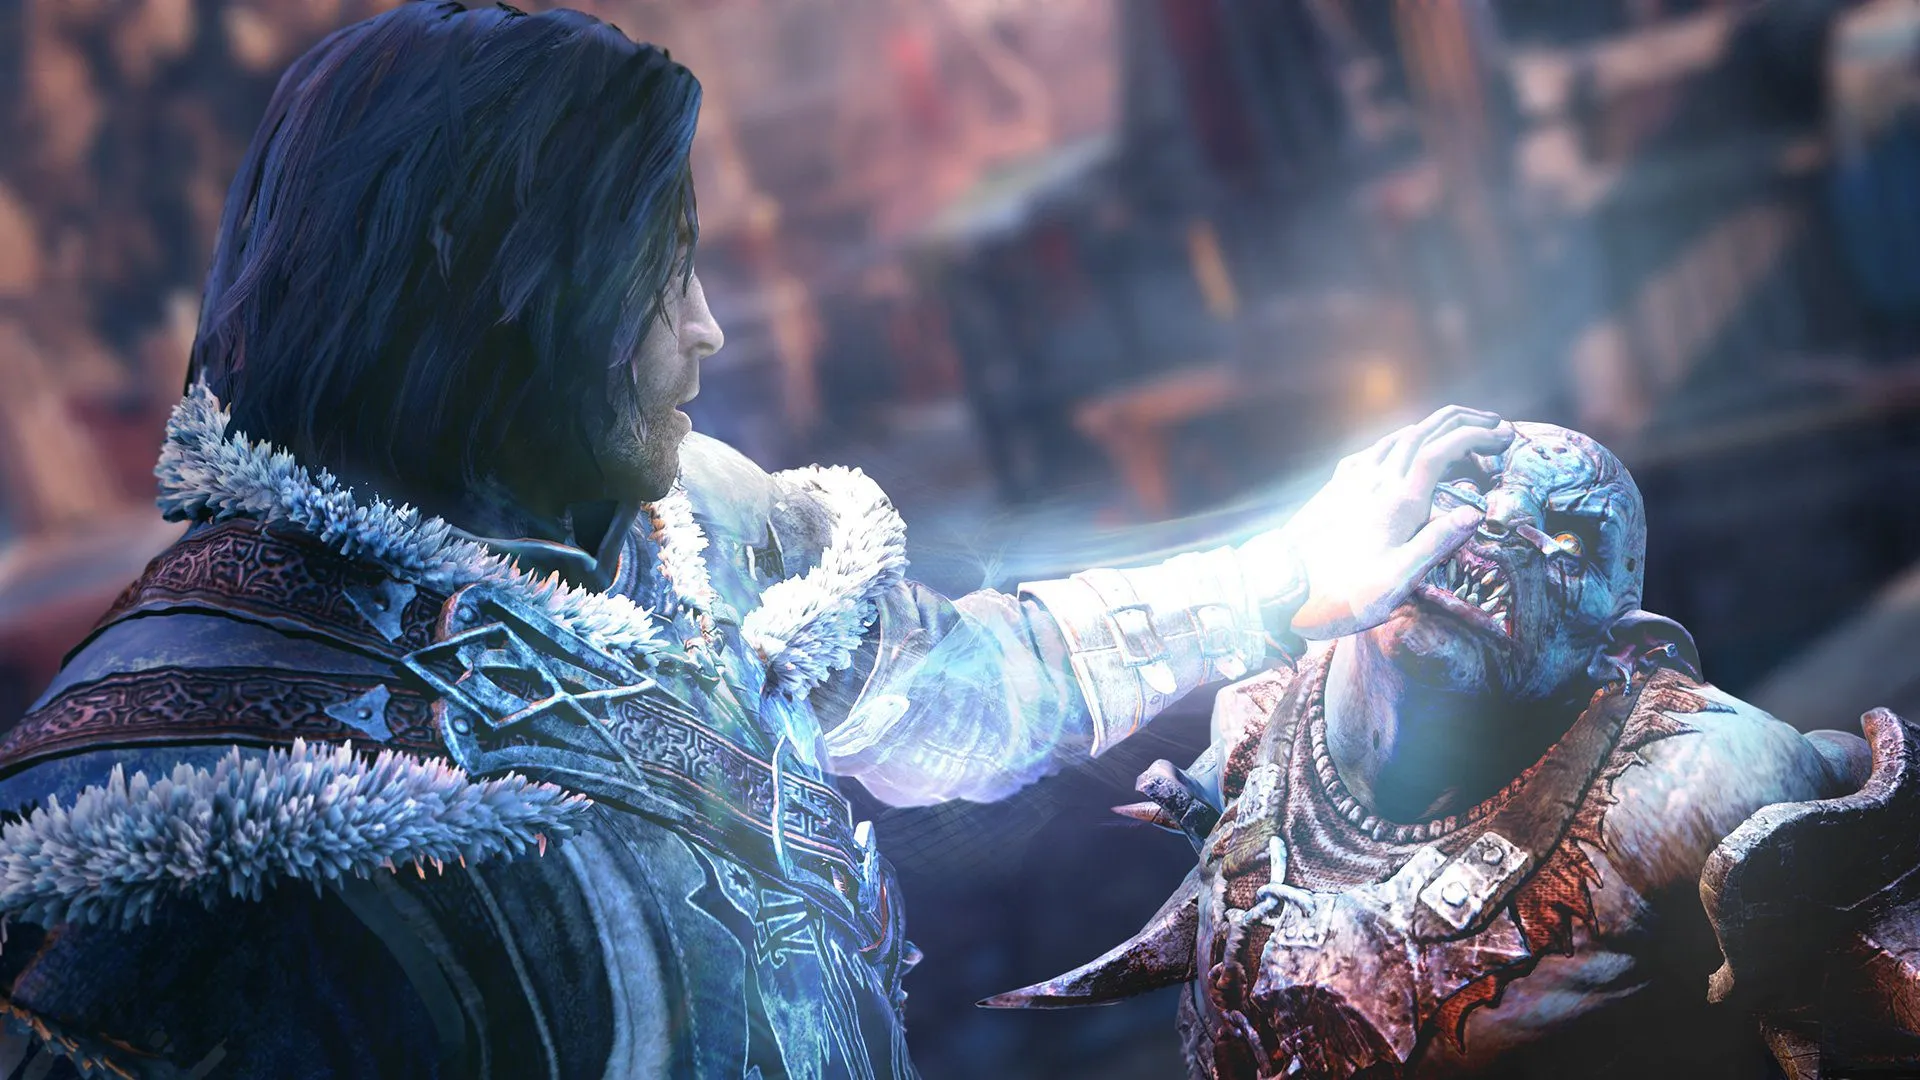 Middle Earth: Shadow of Mordor] Platinum #24. Really enjoyed this one! : r/ Trophies